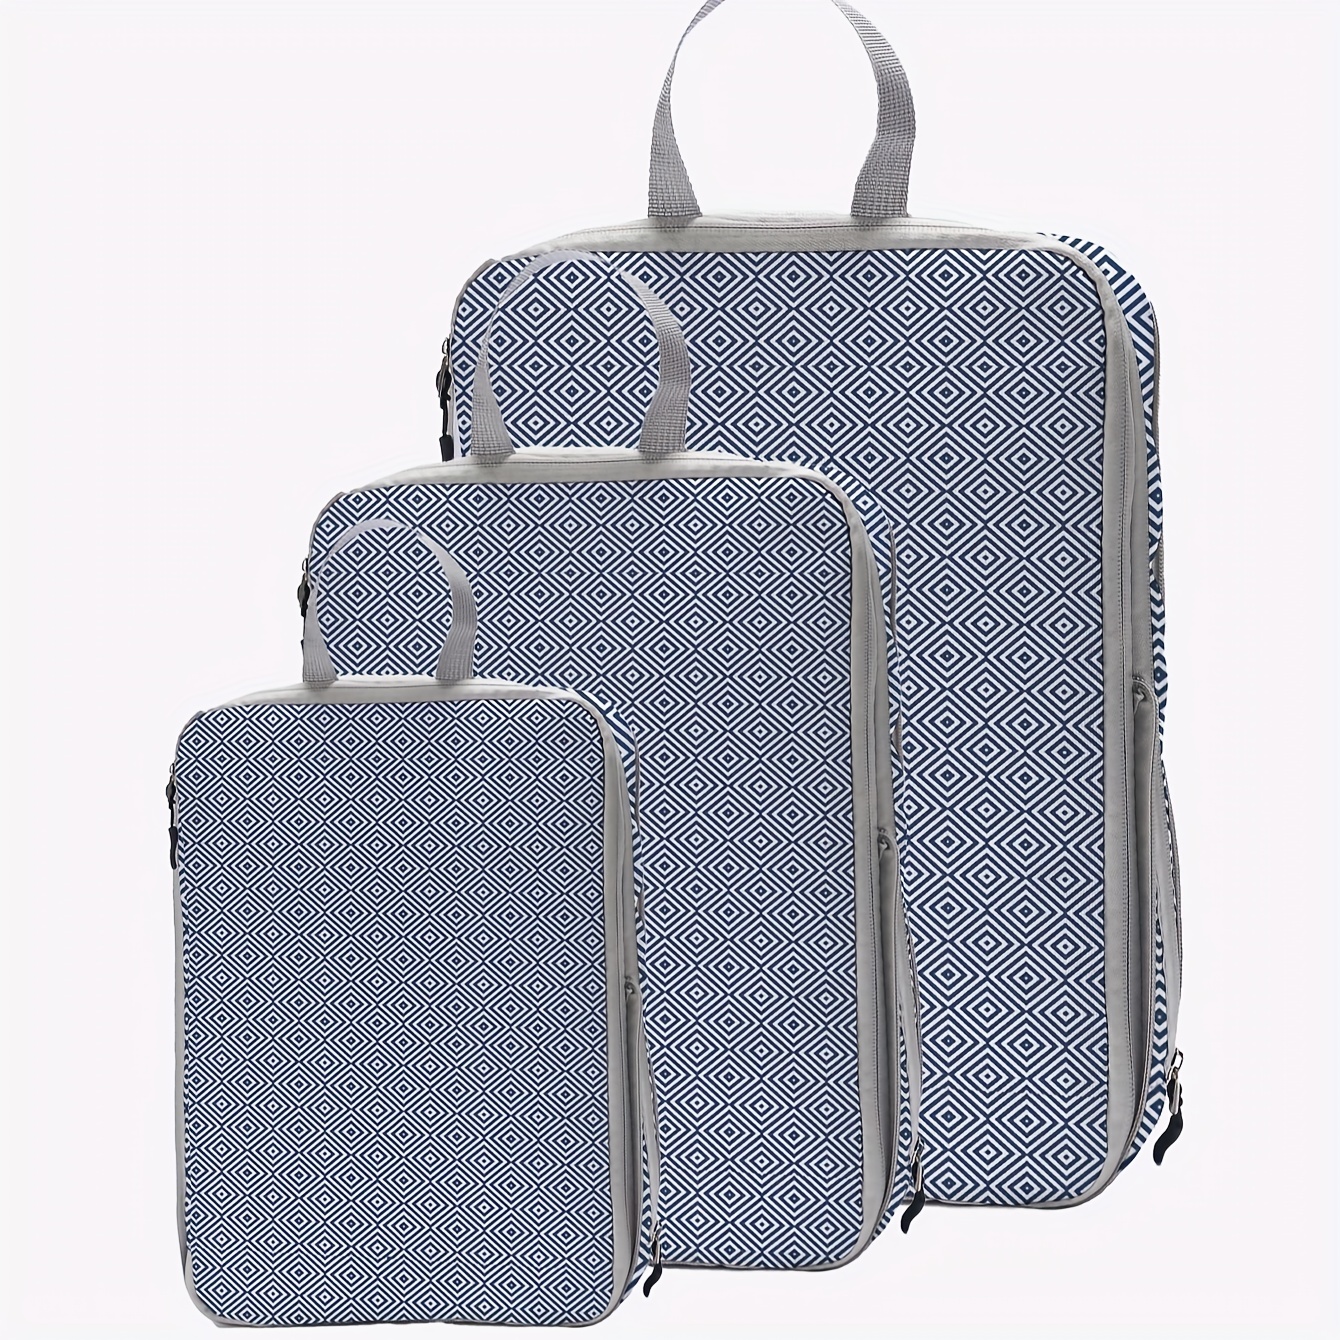 3PCS Compression Packing Cubes Expandable Storage Travel Luggage